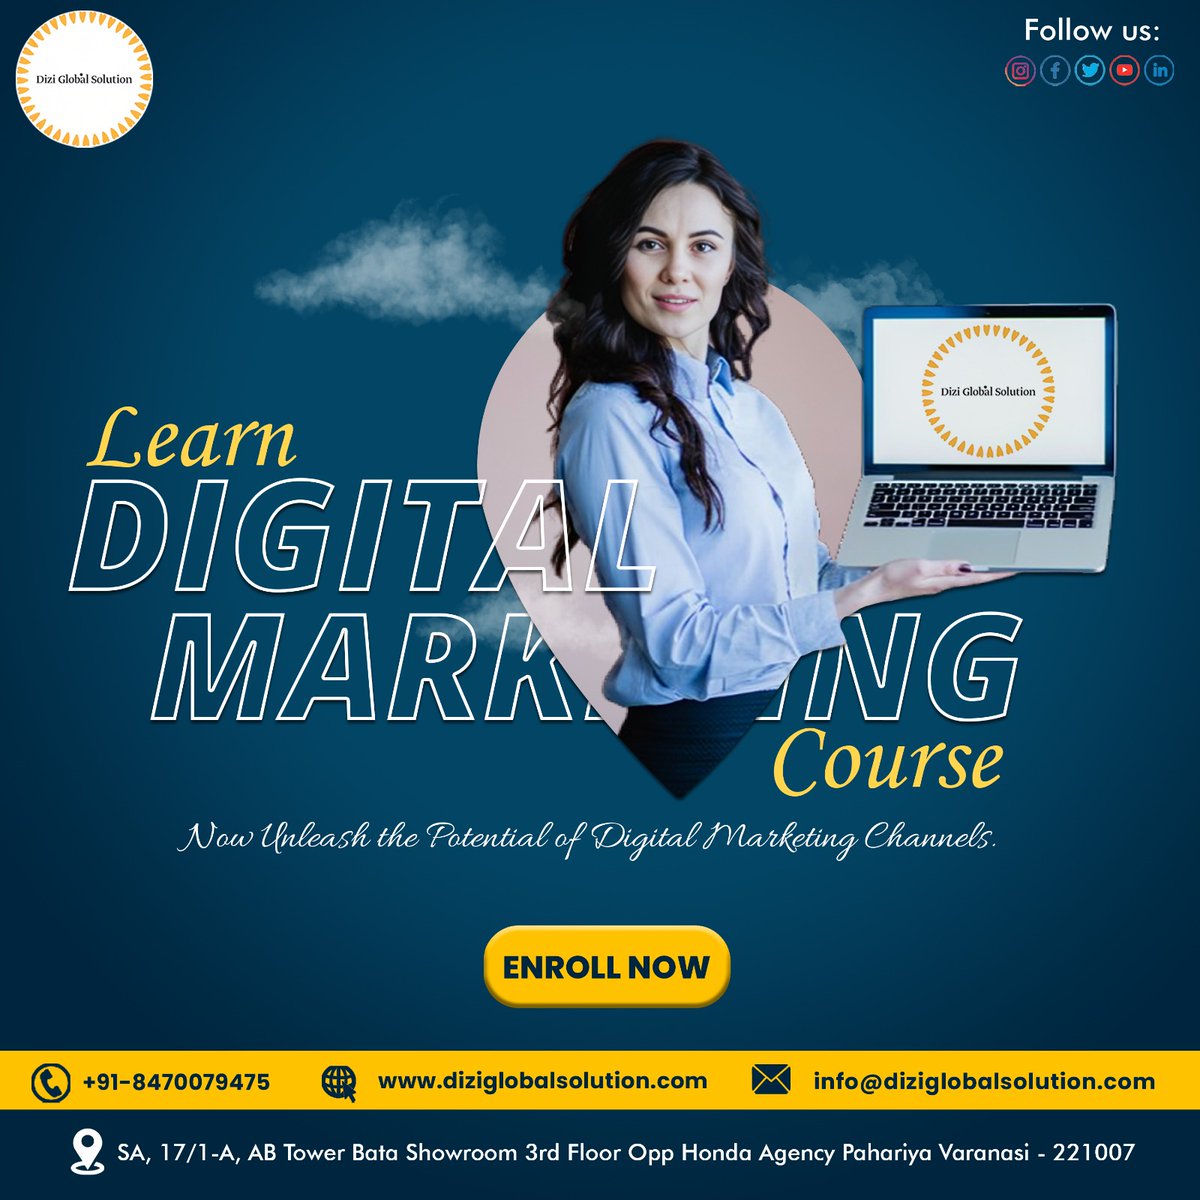 🚀 Unlock the Power of Digital Marketing in Varanasi! 📈 Join us at Dizi Global Solution and embark on a journey to become a digital marketing pro! 💼 Gain practical skills, industry insights, and hands-on experience. 

#DiziGlobalSolution #DigitalMarketingSuccess #Career